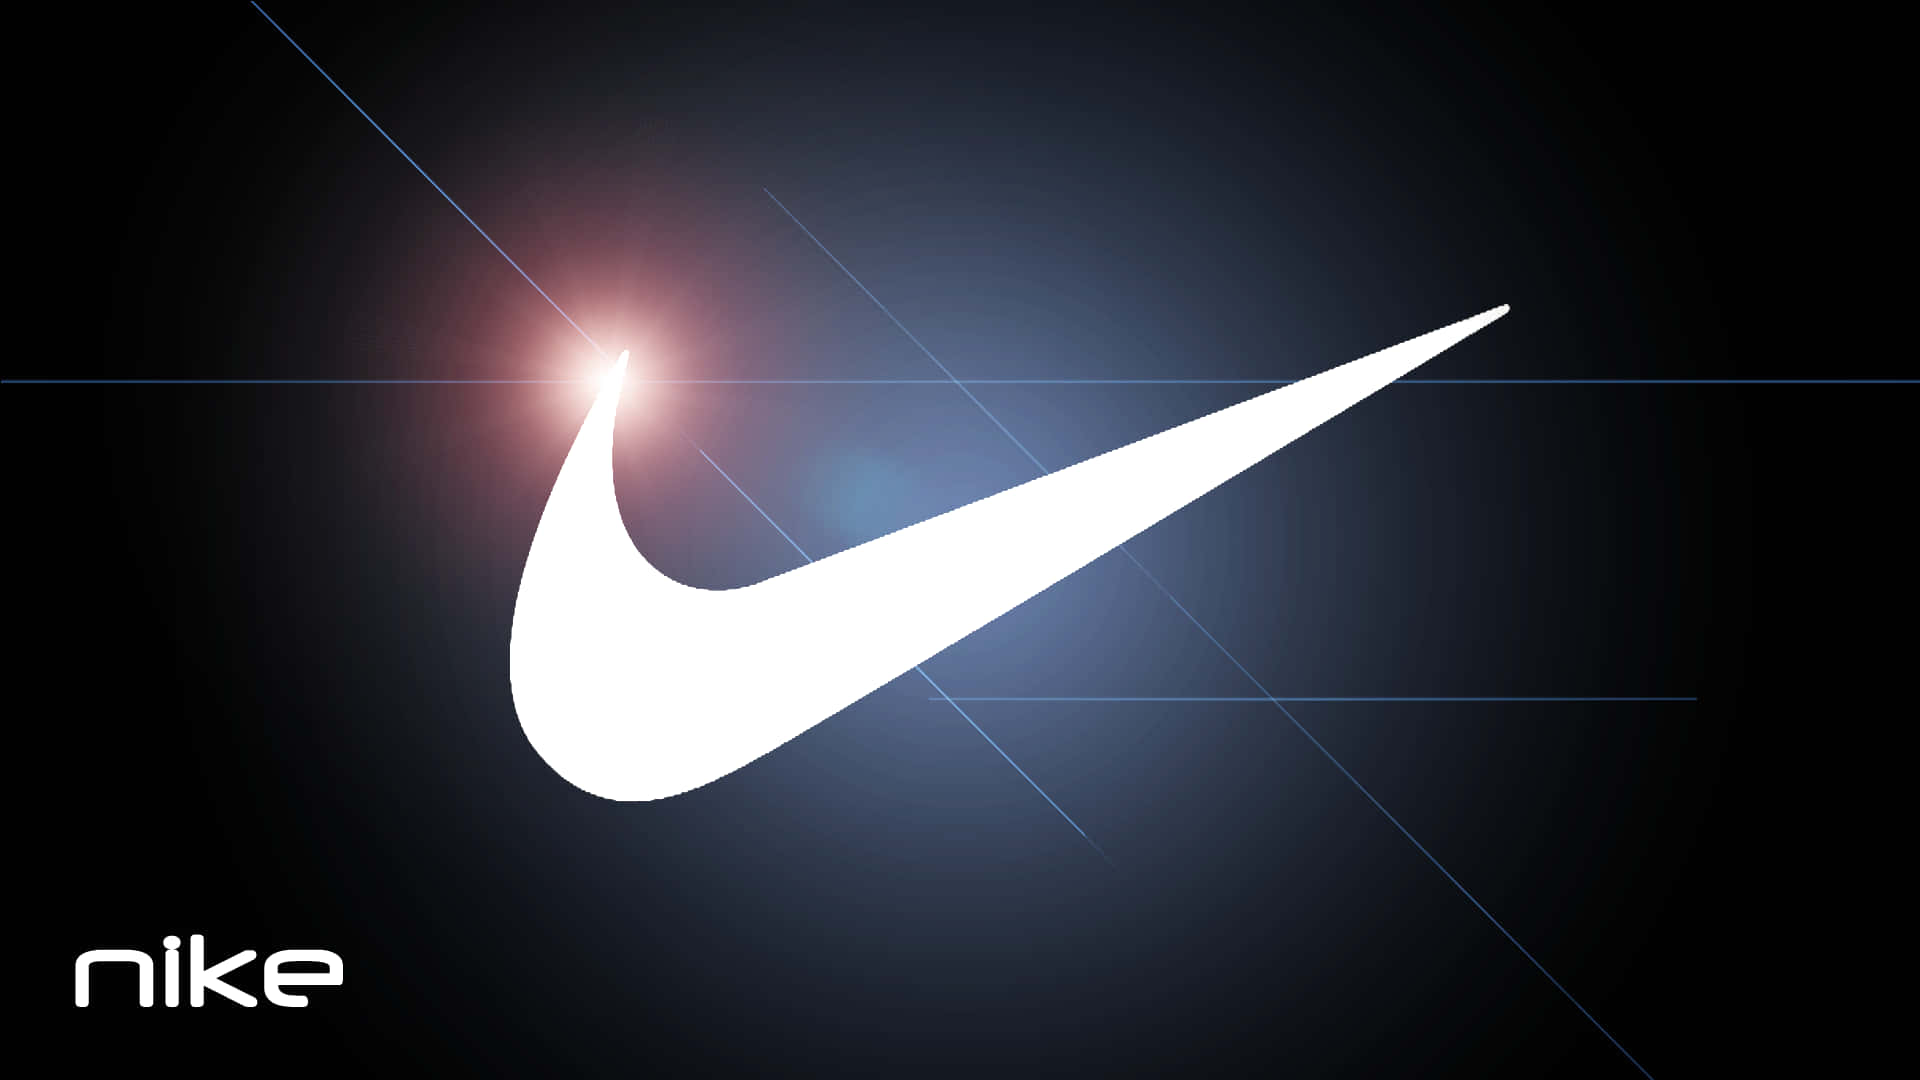 Outrun the competition every day with Nike